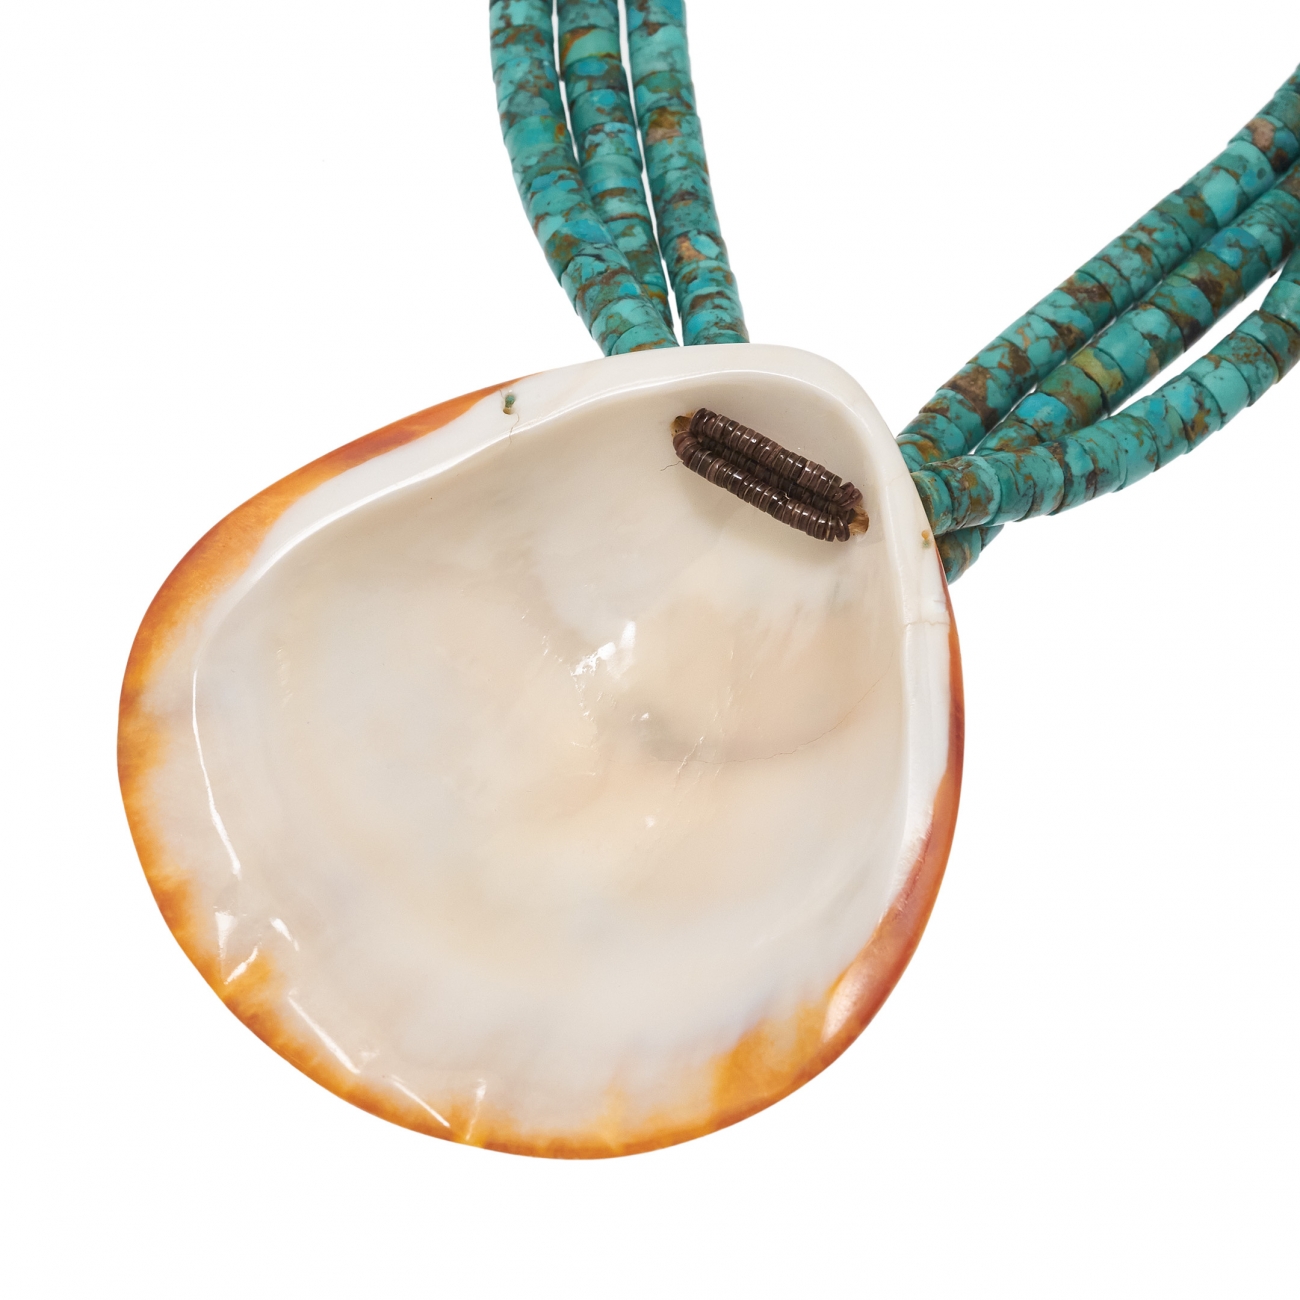 Pueblo necklace CO208 in turquoise heishi and spiny oyster - Harpo